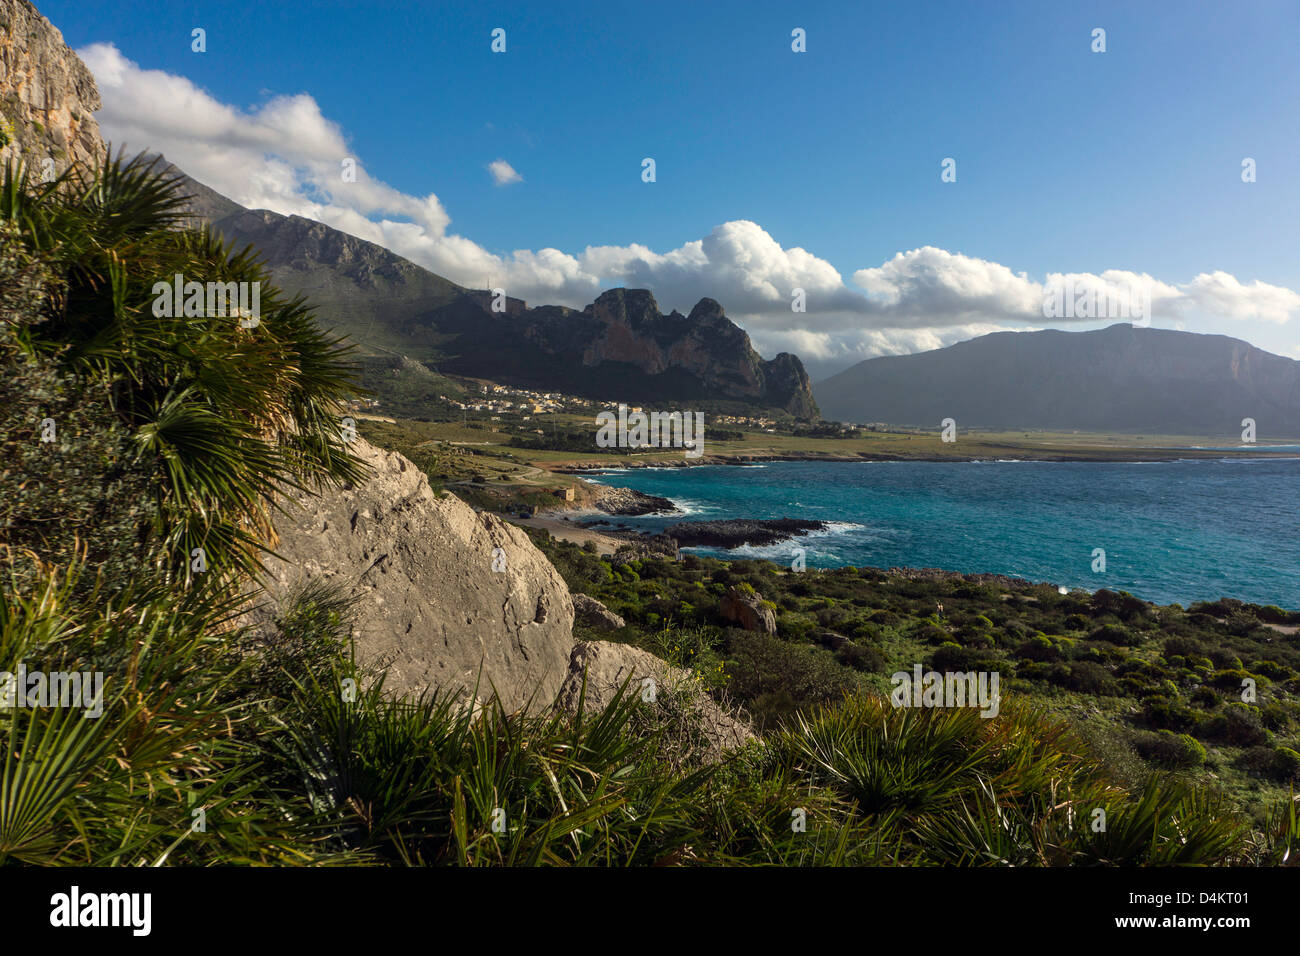 Spring greenery, rocky landscape blue sea and distant mountains, cumulus clouds, San Vito lo Capo, Sicily Stock Photo